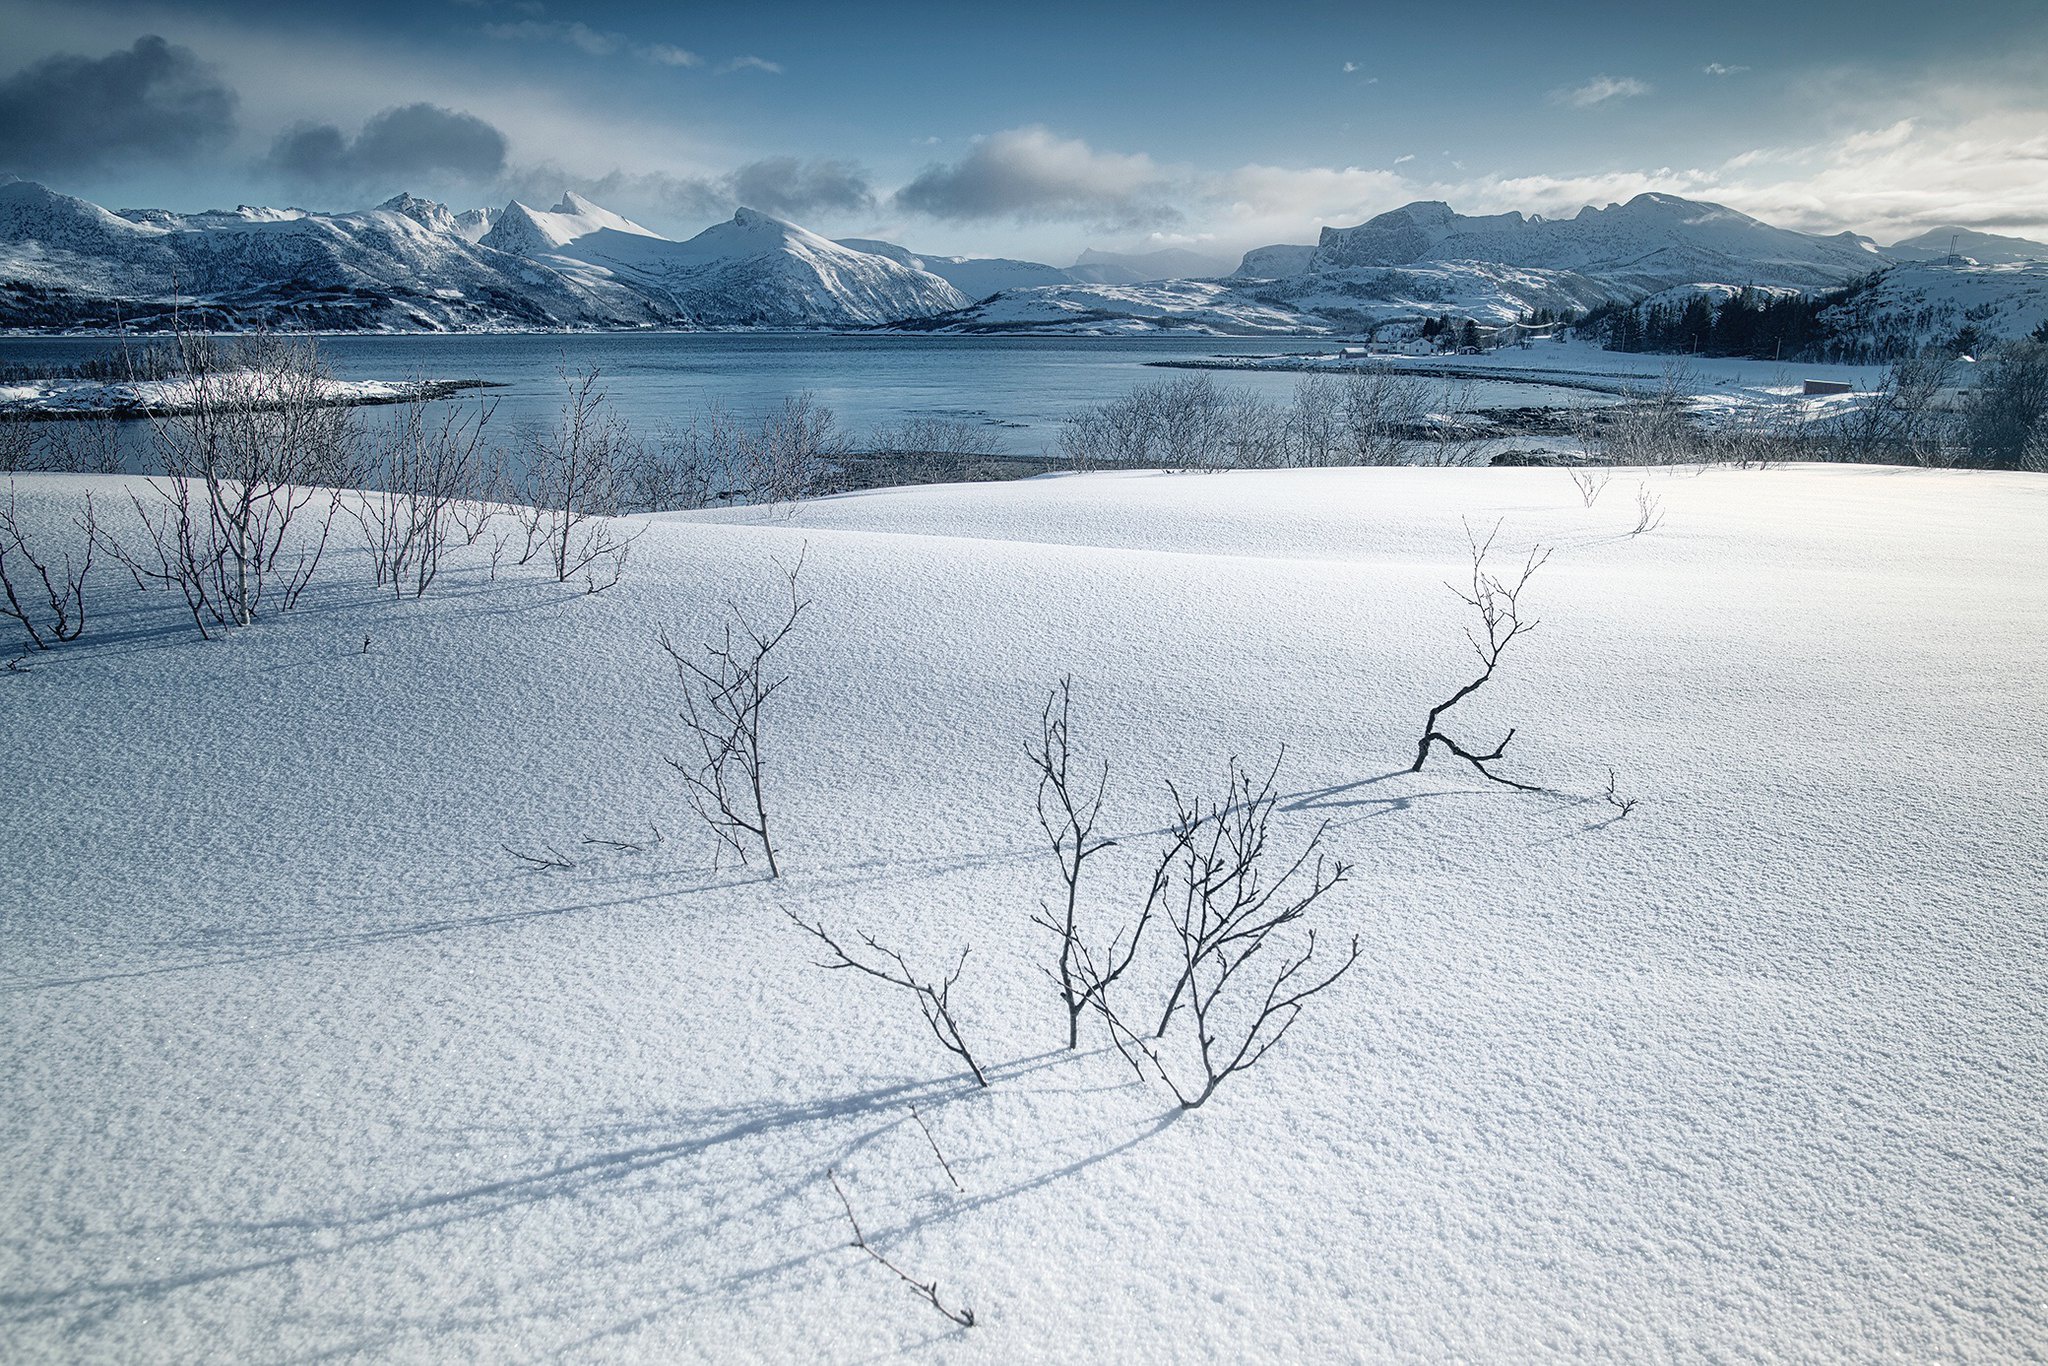 General 2048x1366 snow cold Norway nature winter landscape mountains snowy mountain